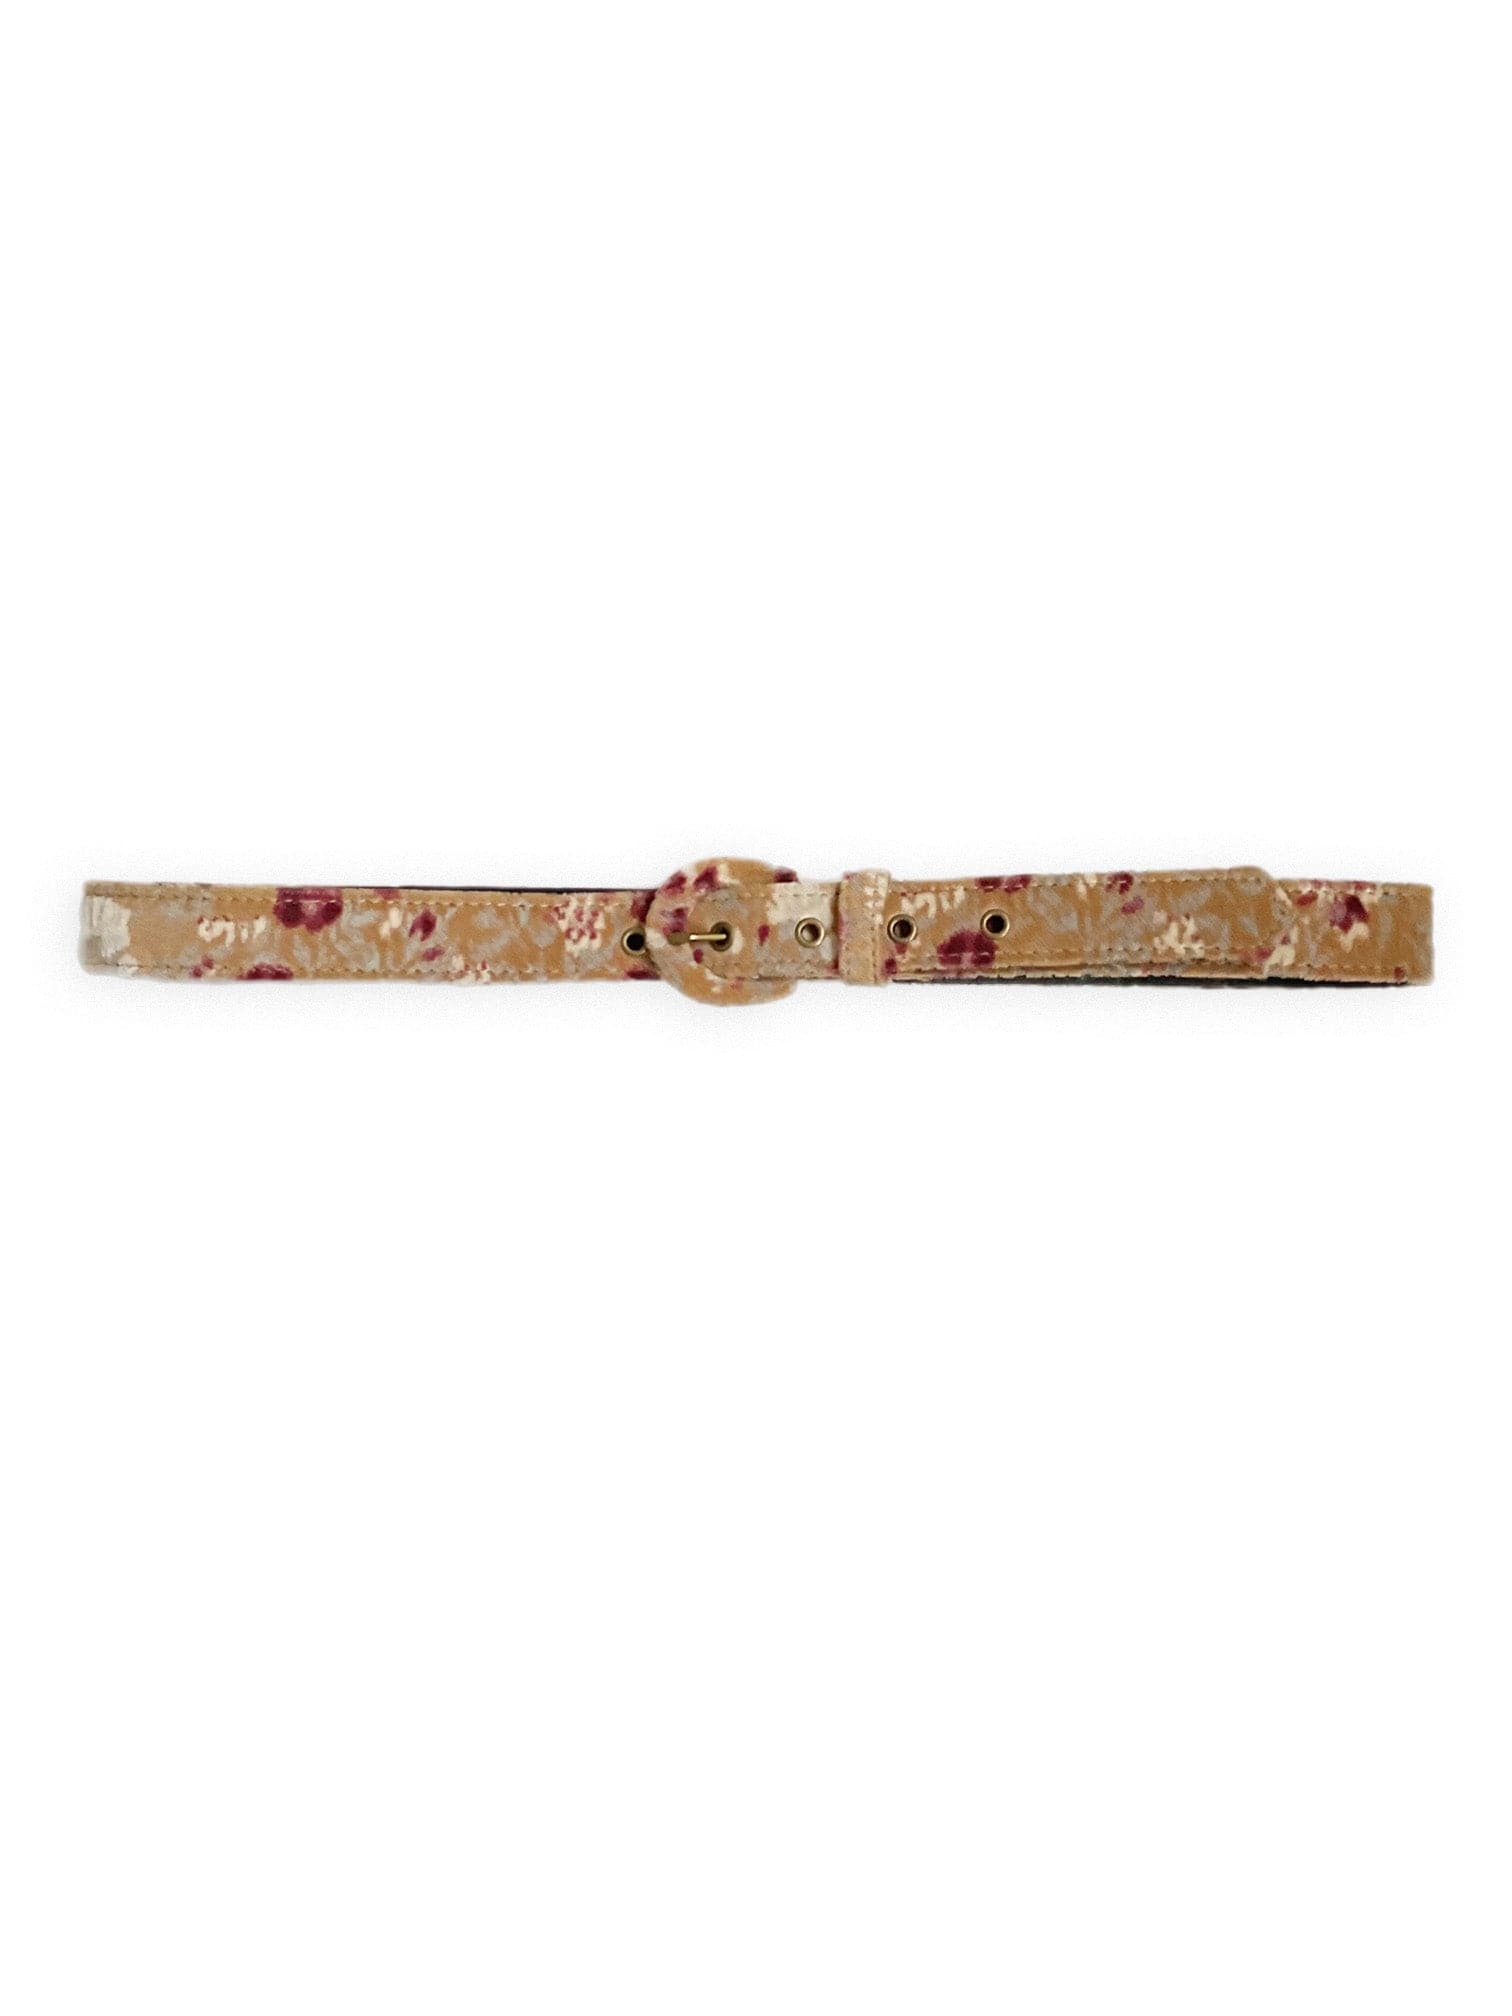 Narrow Belt for Nature vs Nurture Collection Belts CHRISTINE ALCALAY Floral Velvet (Italian Cotton) Extra Small 